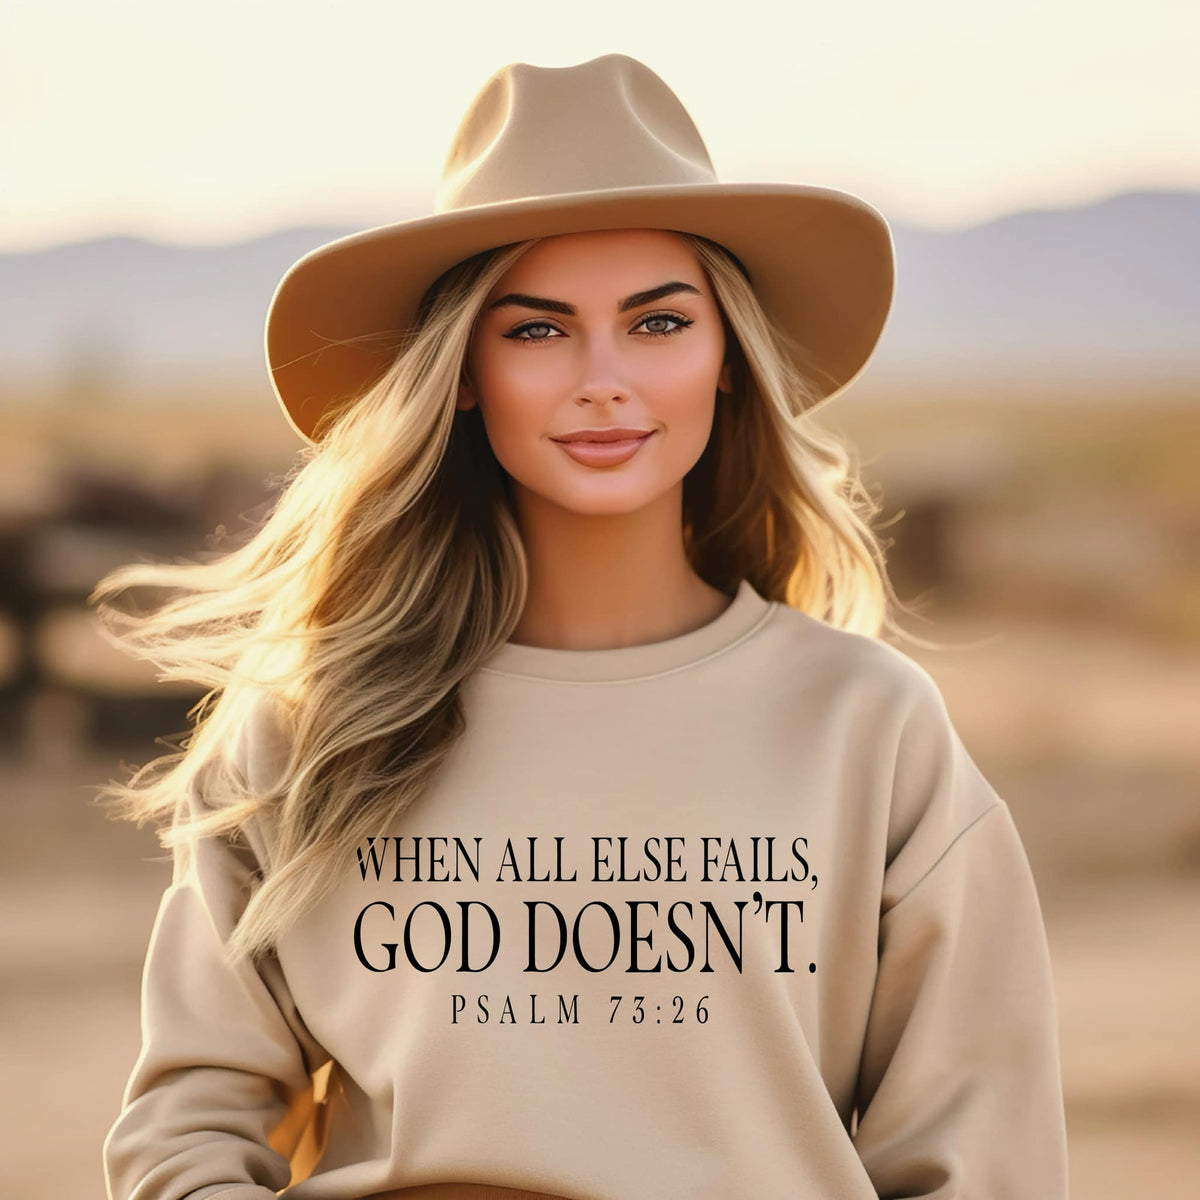 God Doesn’t~ Graphic Tee/Sweatshirt options allow 7 days to process + shipping time